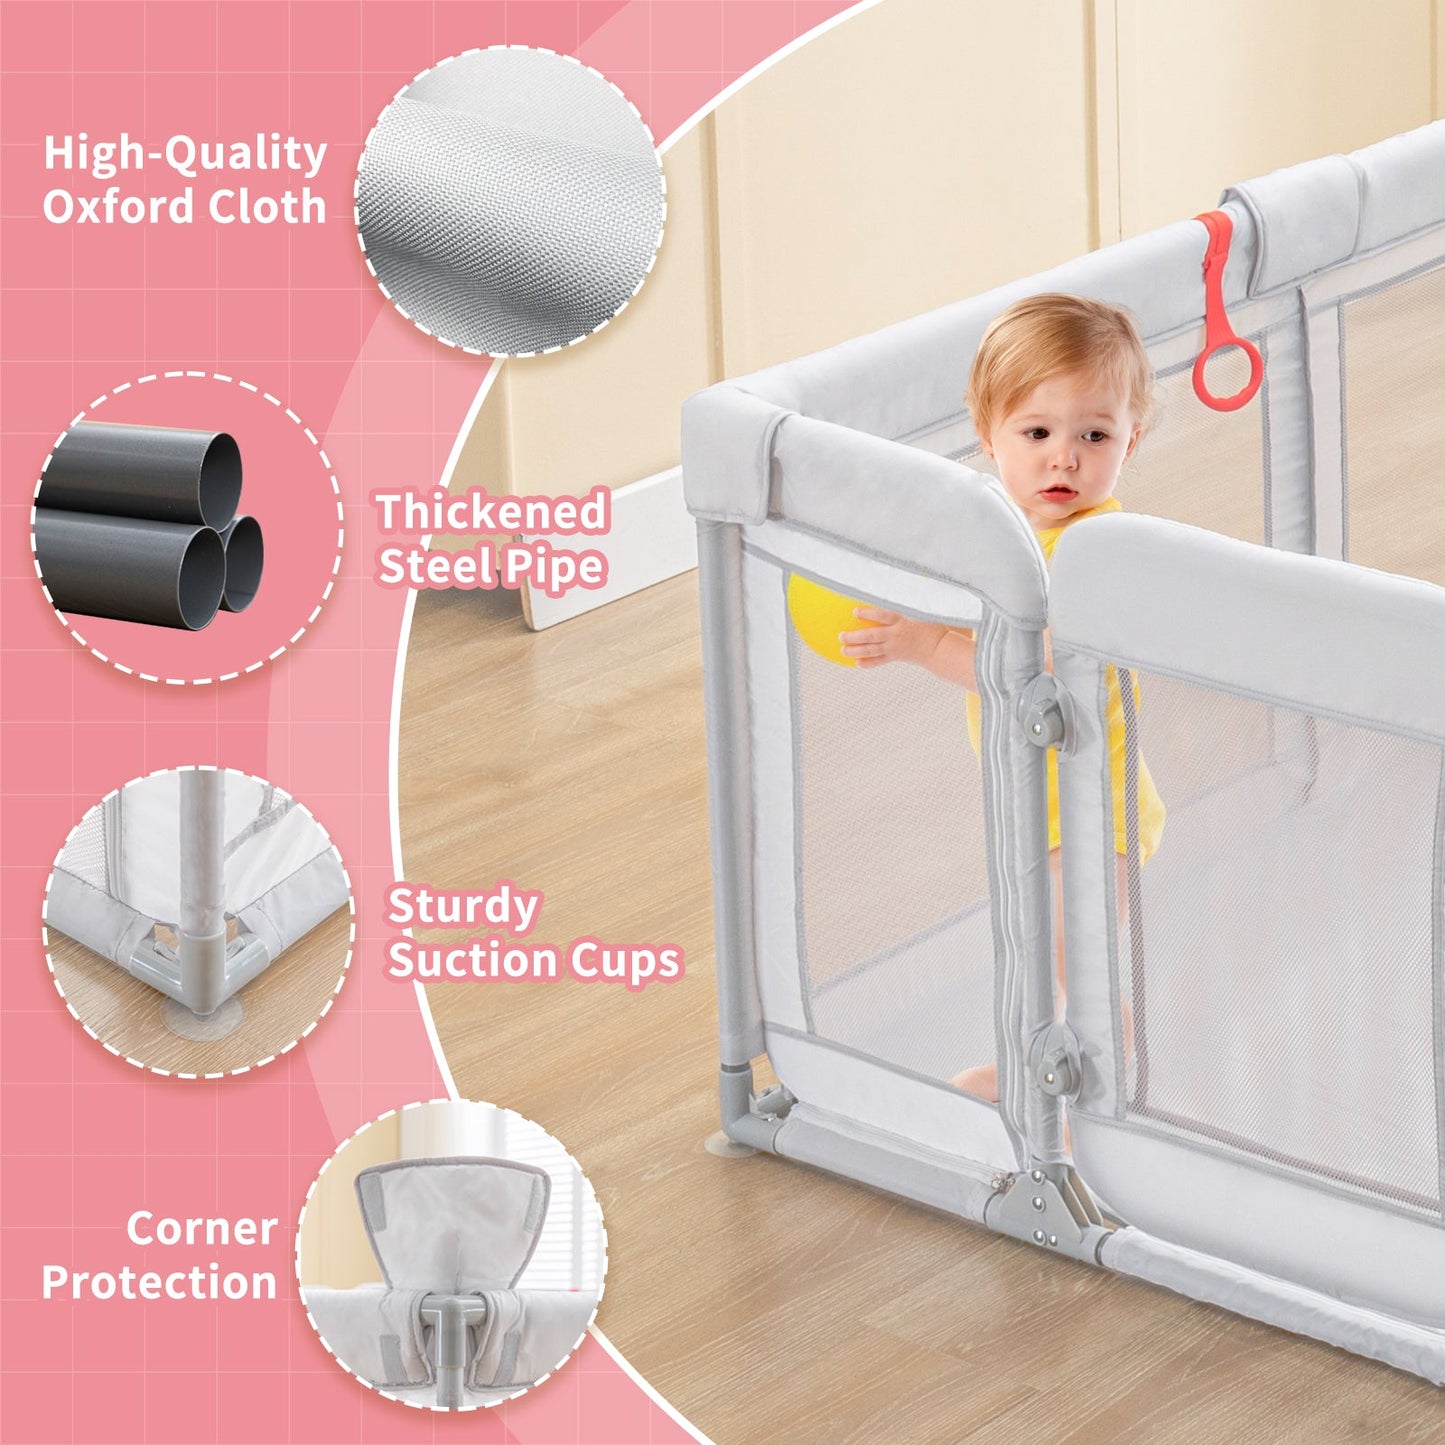 Baby playpen for babies and toddlers with breathable mesh